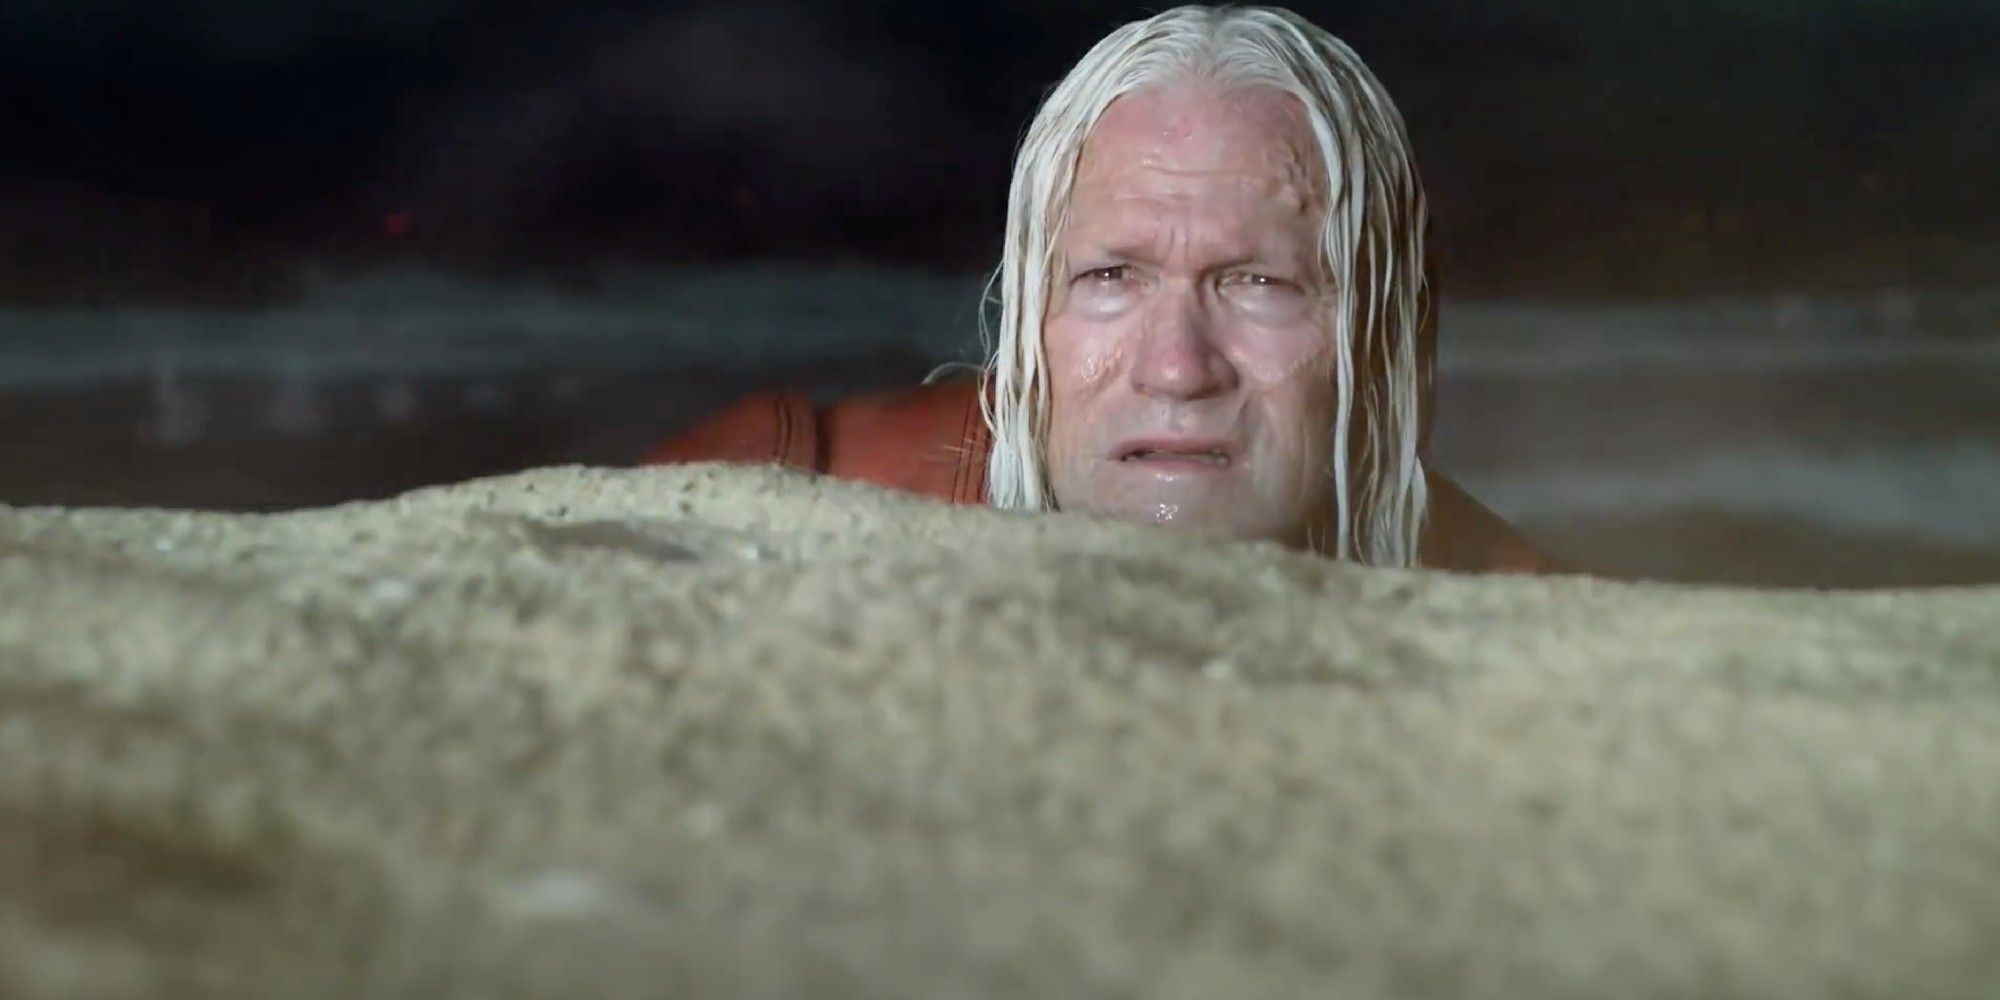 Michael Rooker as Savant peeking over a rock with confusion